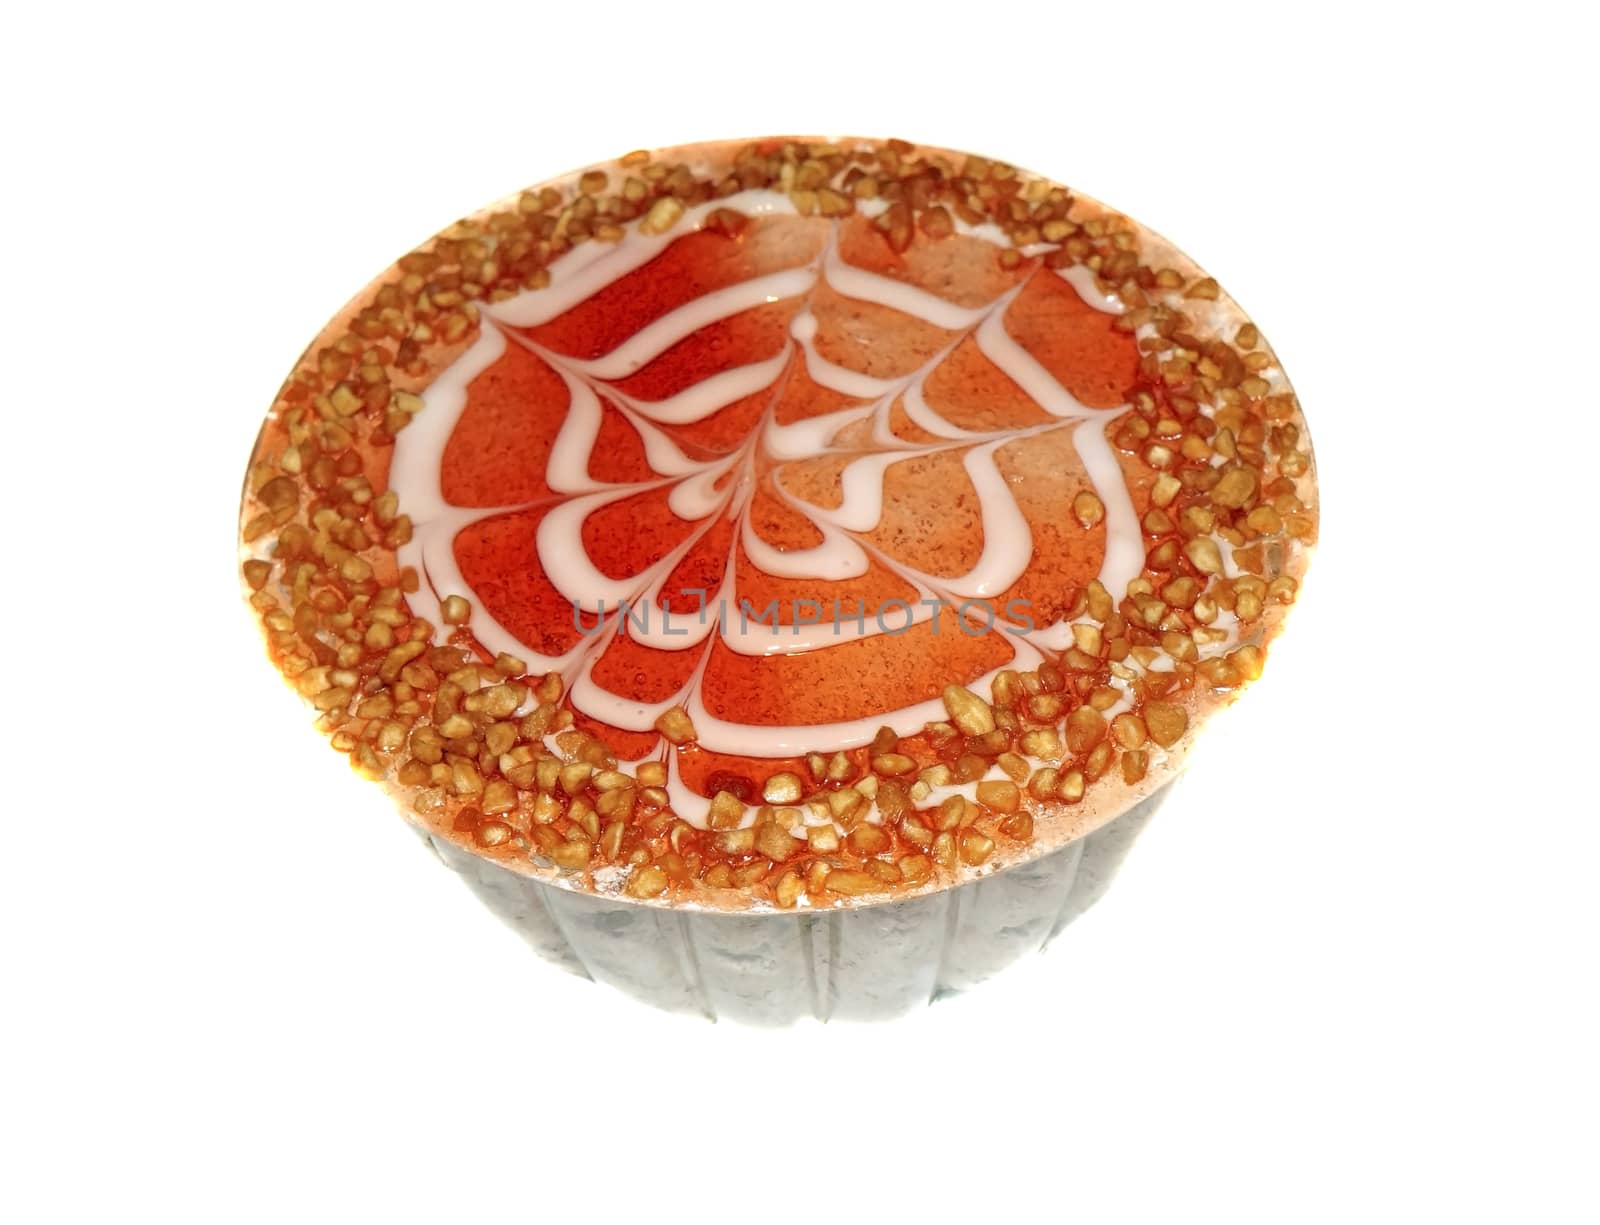 Cake decorated with red berry jelly and crushed nuts isolated                              